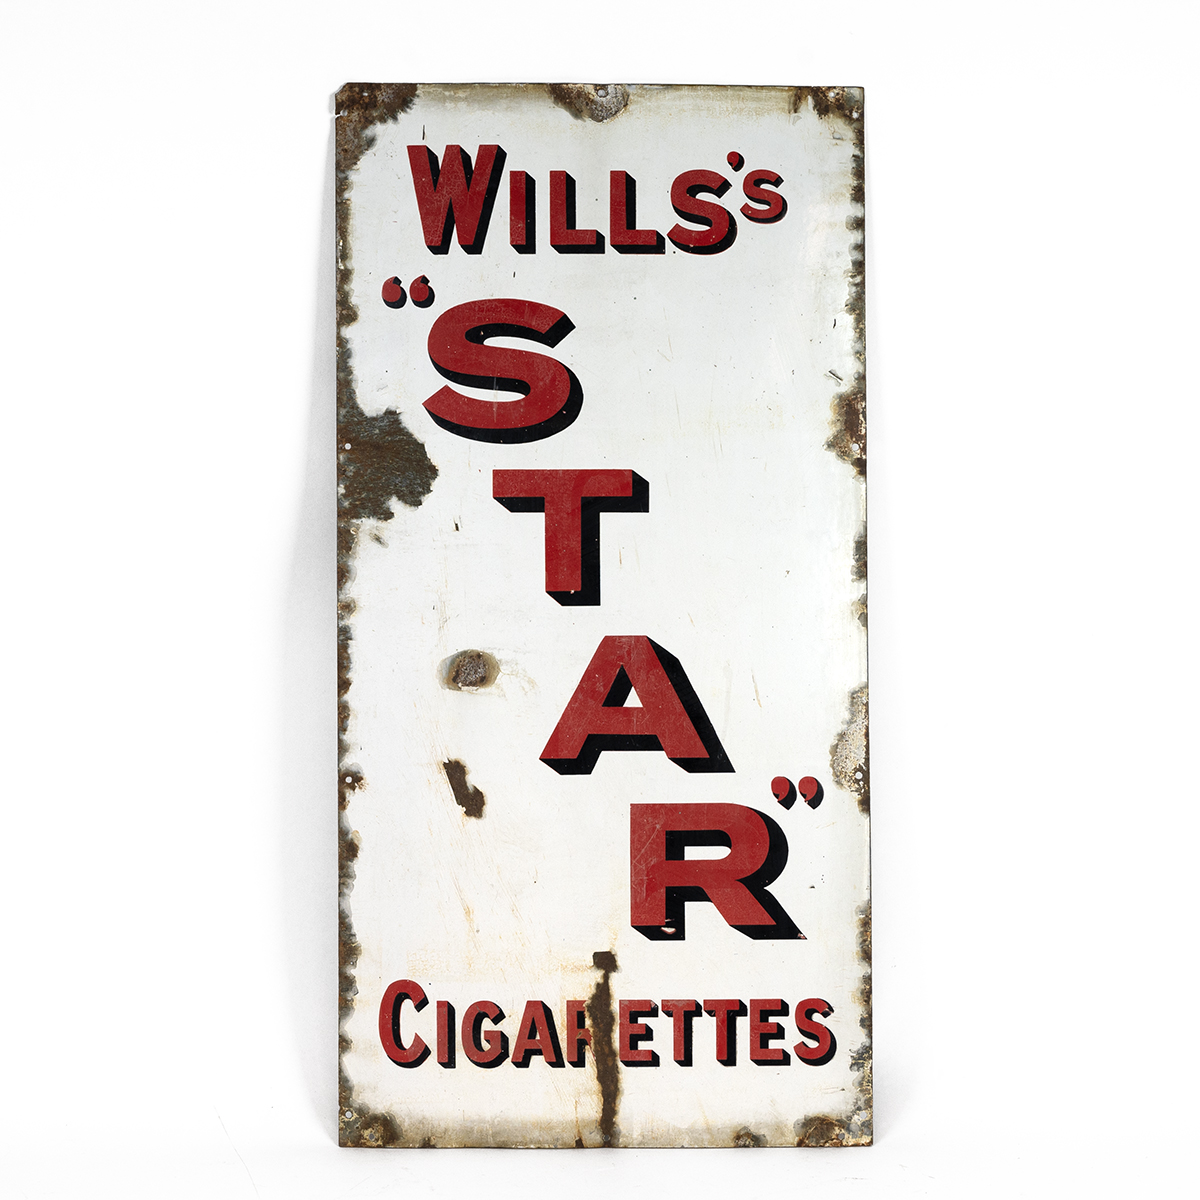 Wills "Star" Cigarettes enamel advertising sign with apparent wear.  W 46cm, H 92cm.